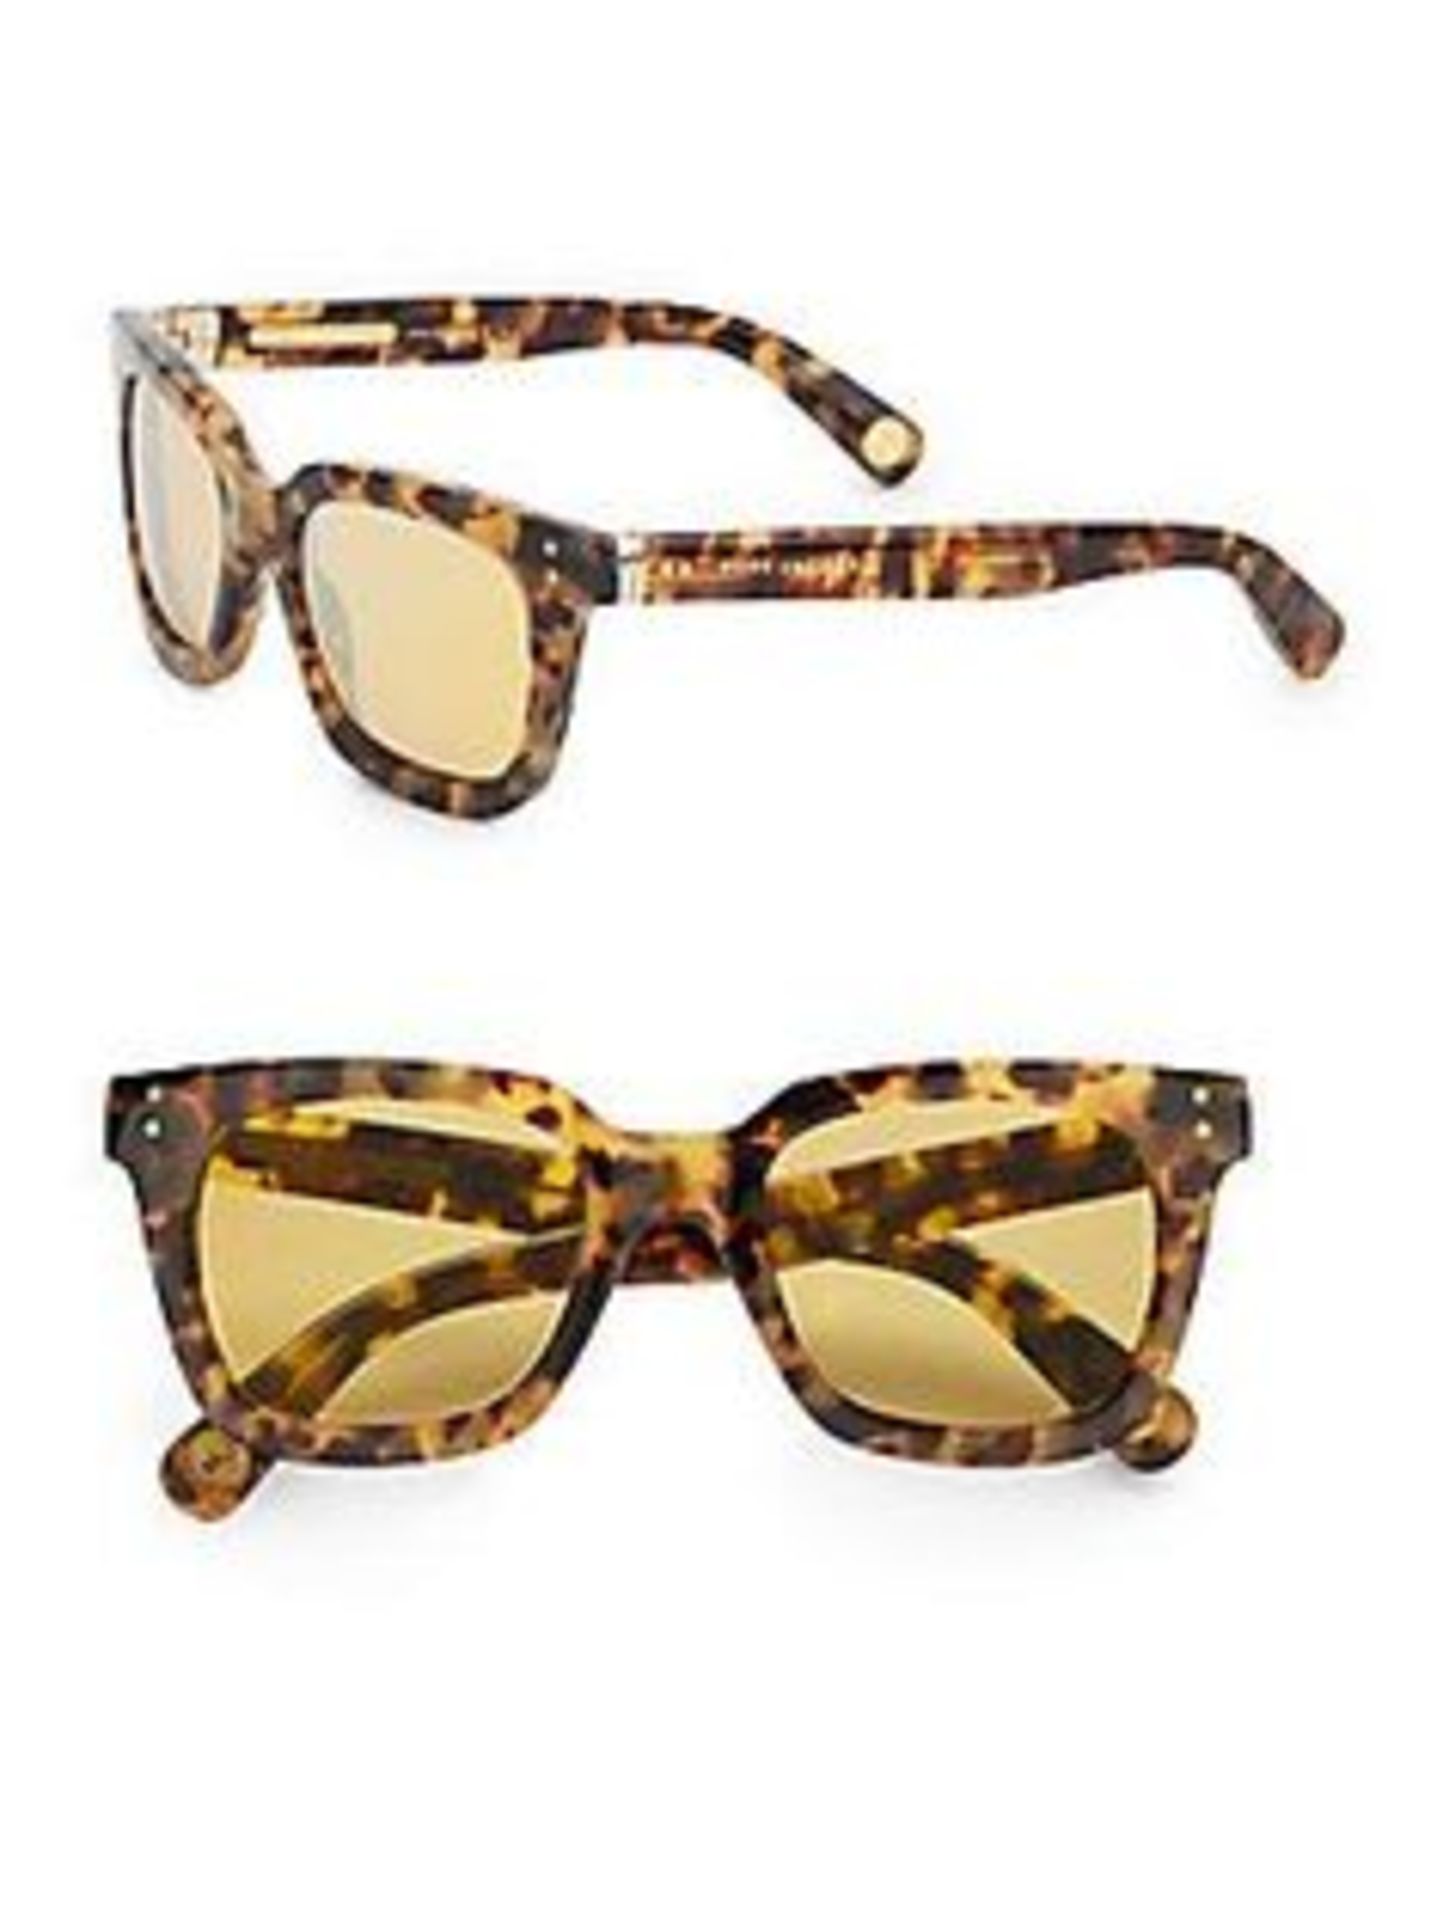 V Grade A Gents Jeep Tortiose Shell Sunglasses - Does Not Include Reatil packgaing (Image Similar)